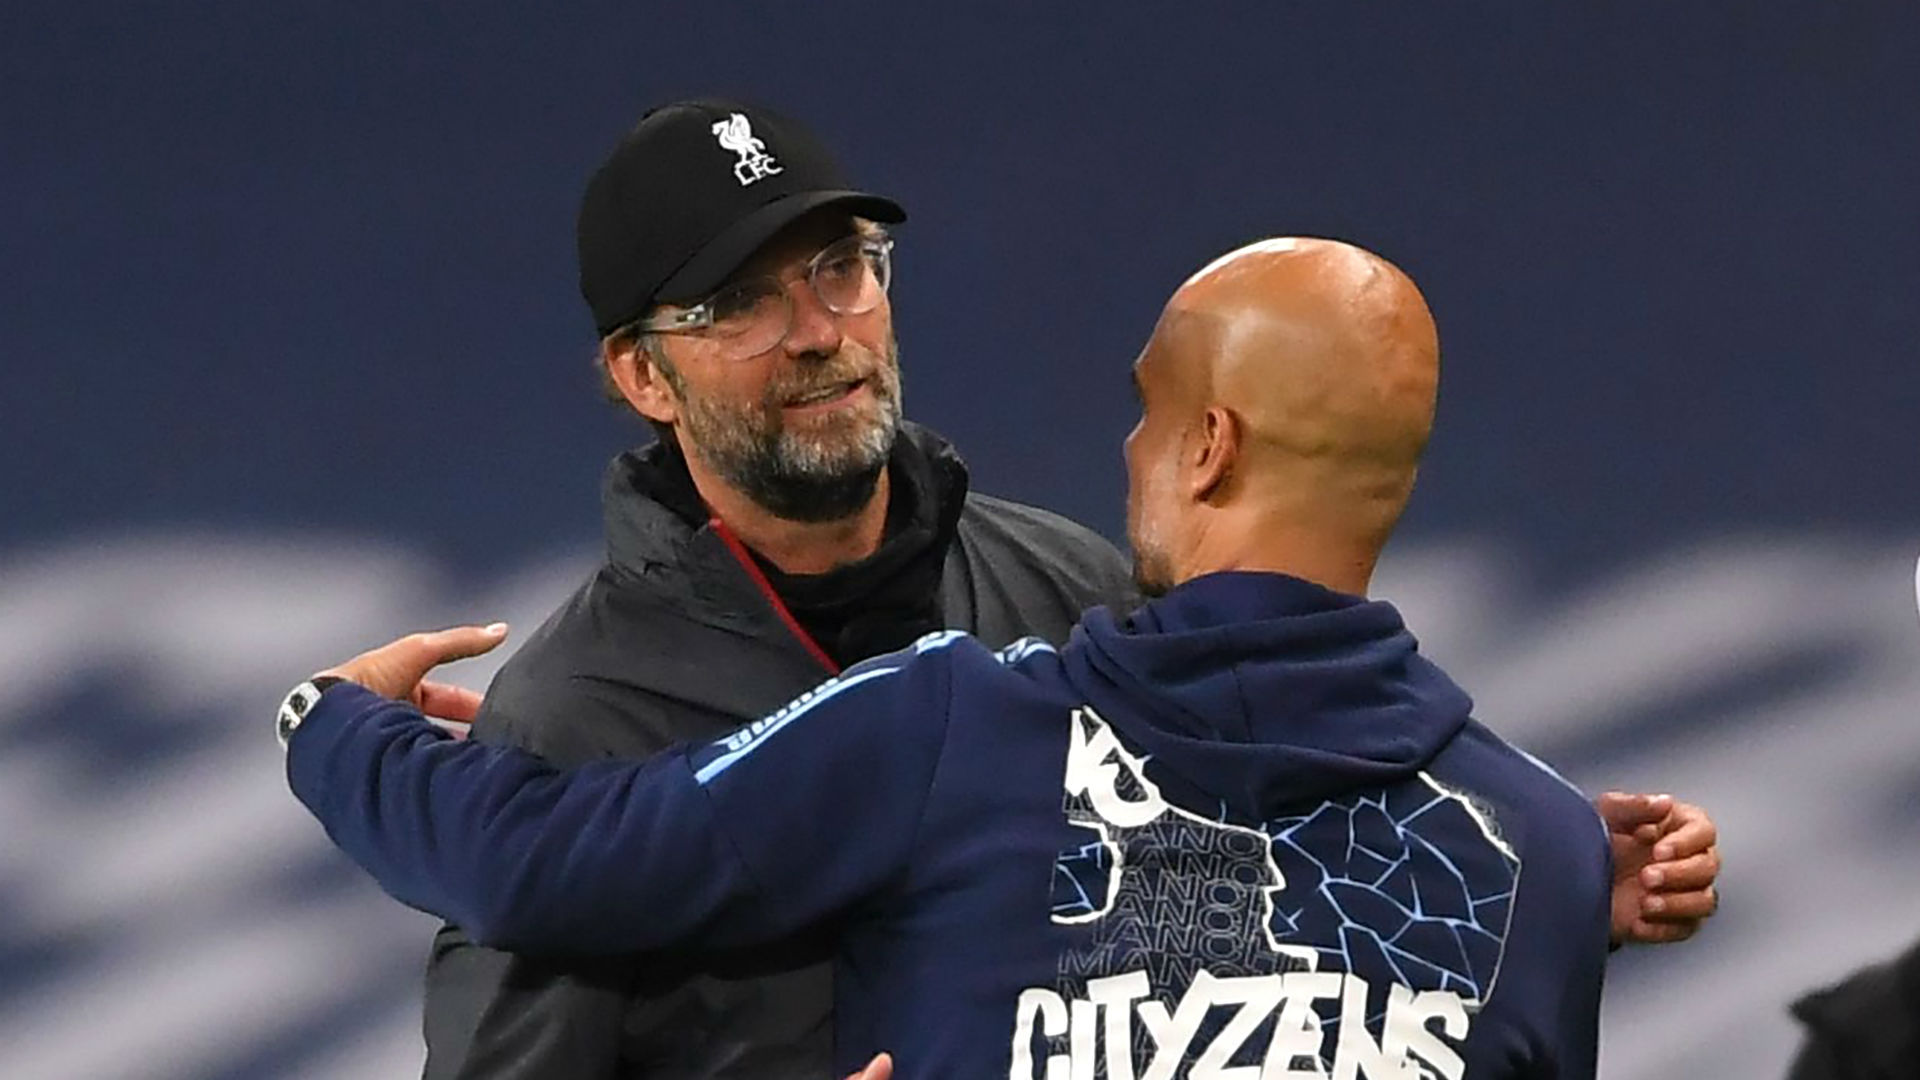 Jurgen Klopp felt Manchester City's verdict at the Court of Arbitration for Sport was not one to be welcomed.